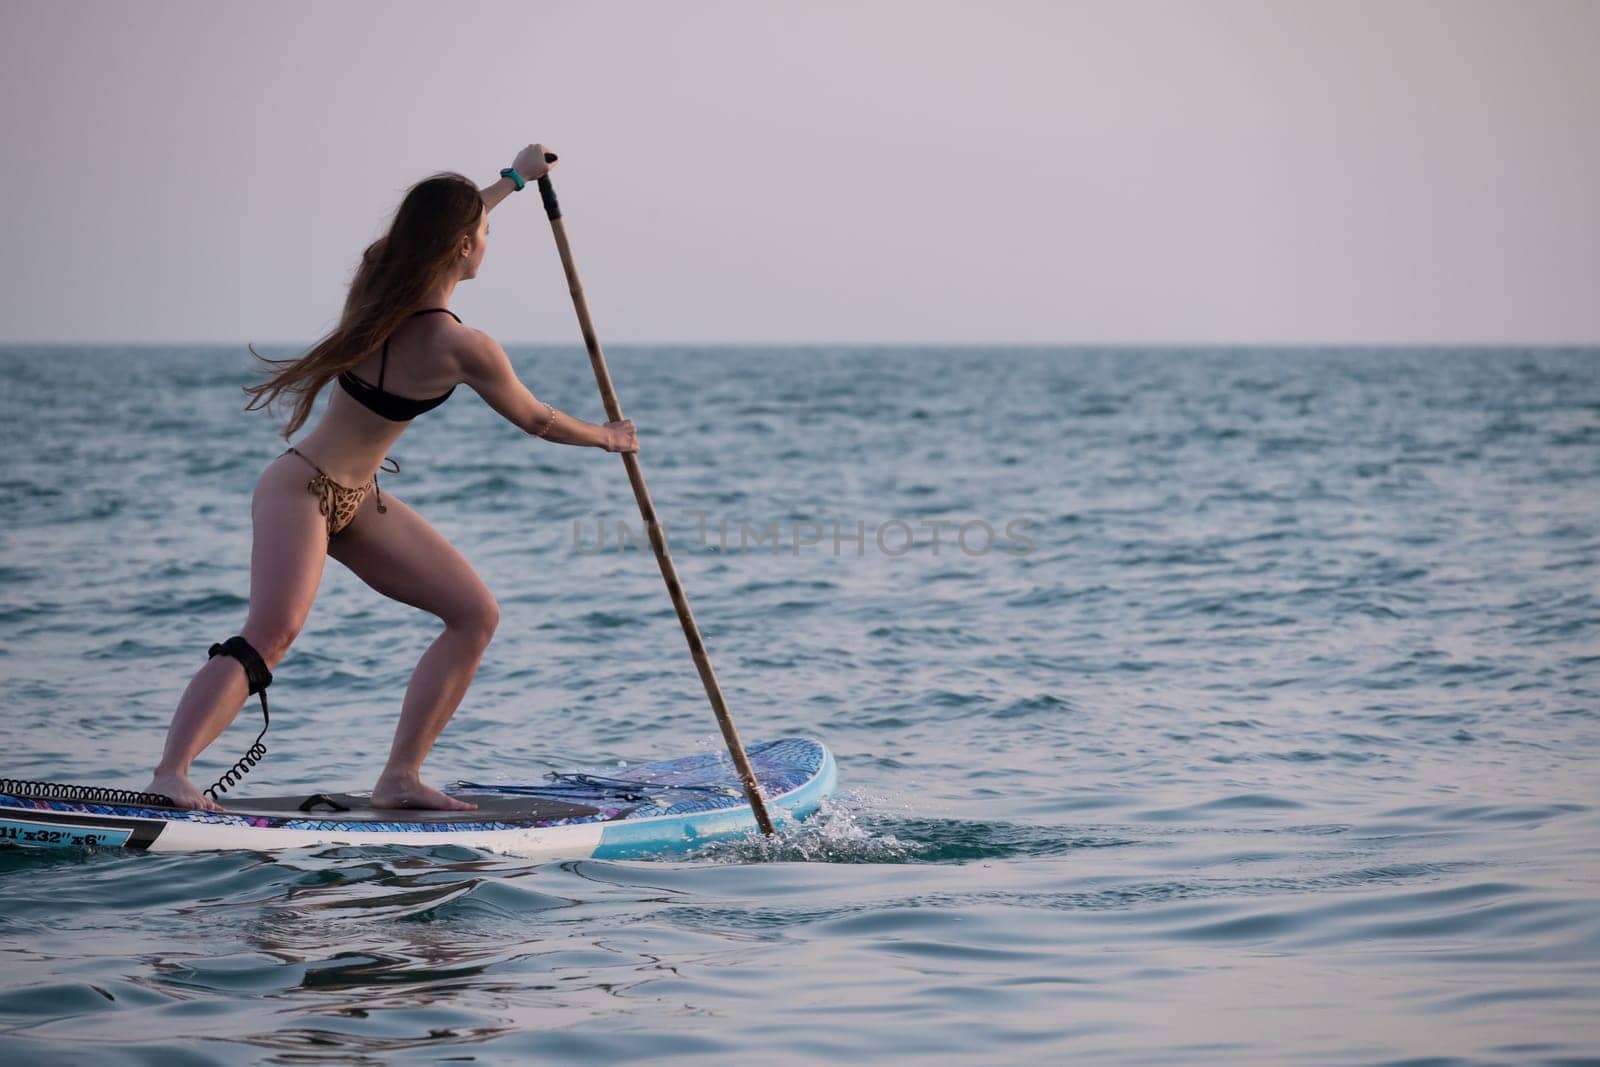 sexy girl on a sup board in the sea with paddle professionally swims beautifully and gracefully